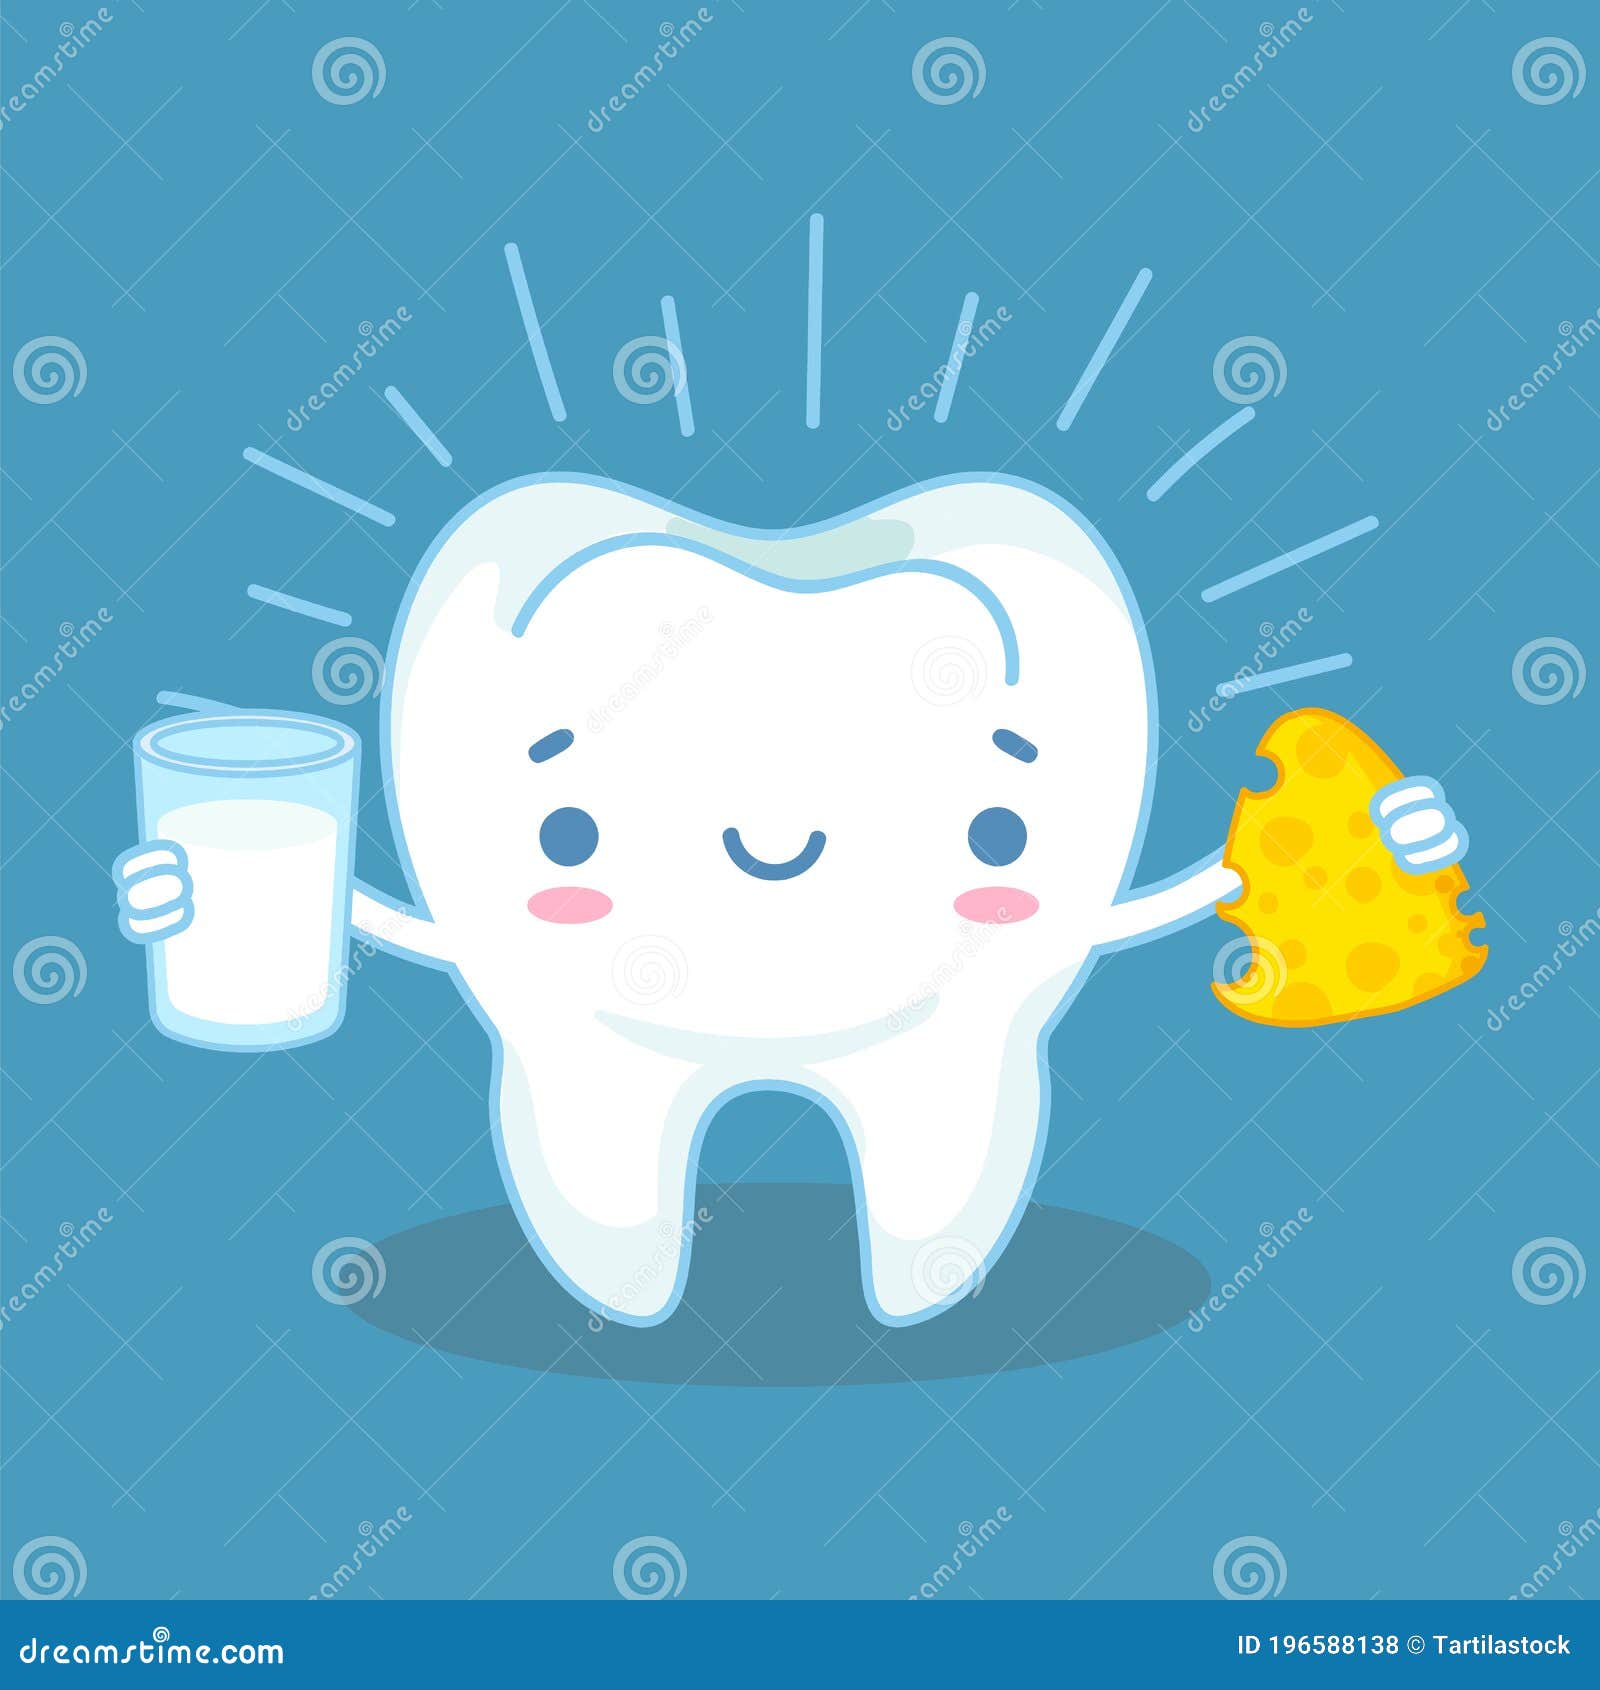 teeth and calcium. healthy tooth and milk products with high calcium, friendly cheese and milk, preventative habit